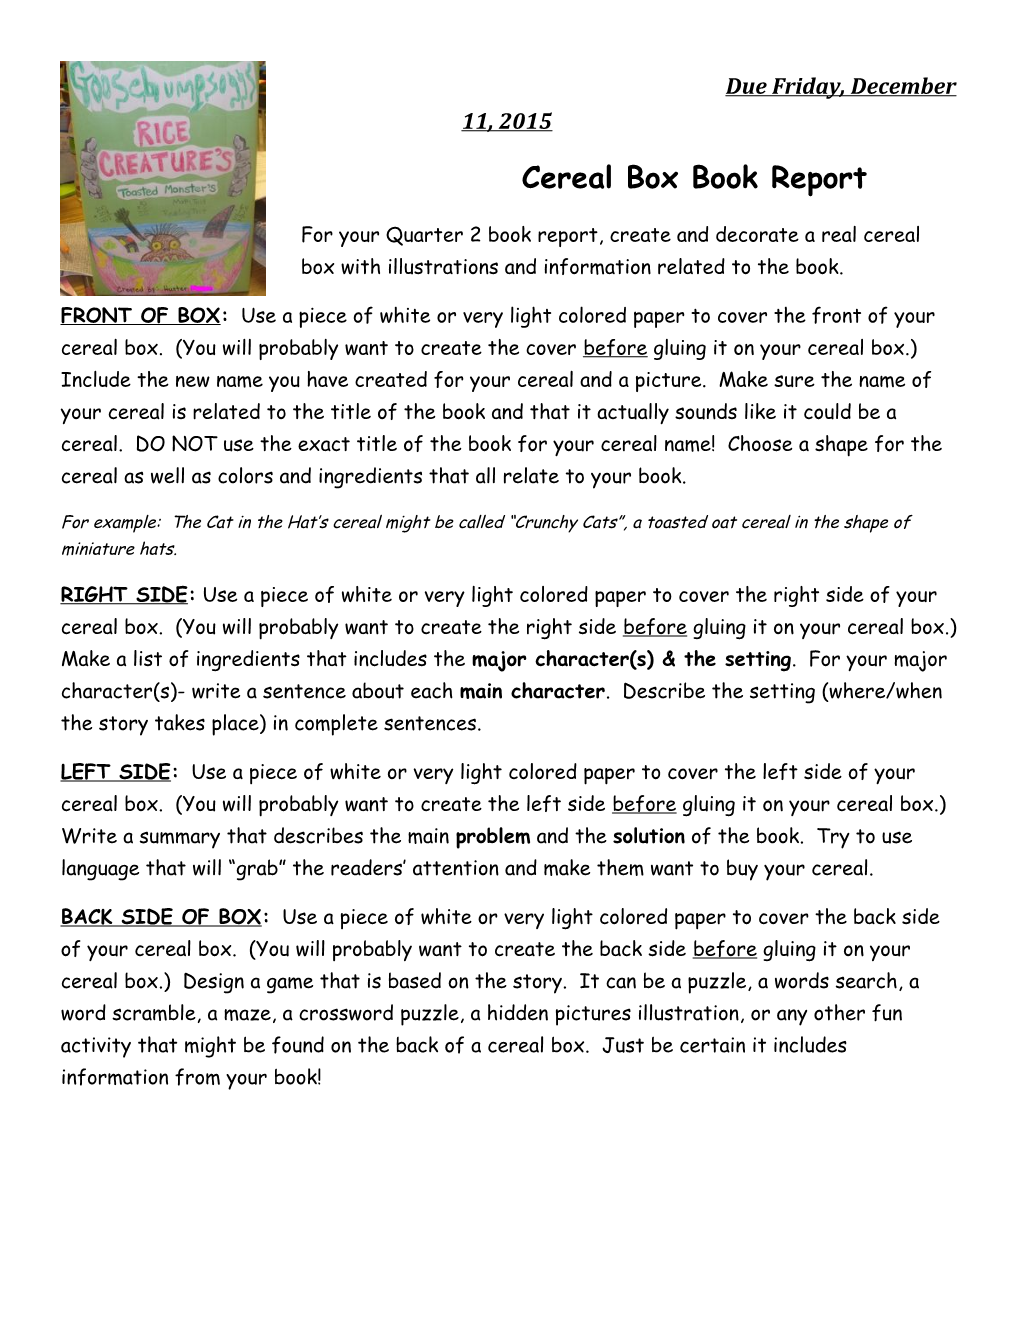 Cereal Box Book Report s2